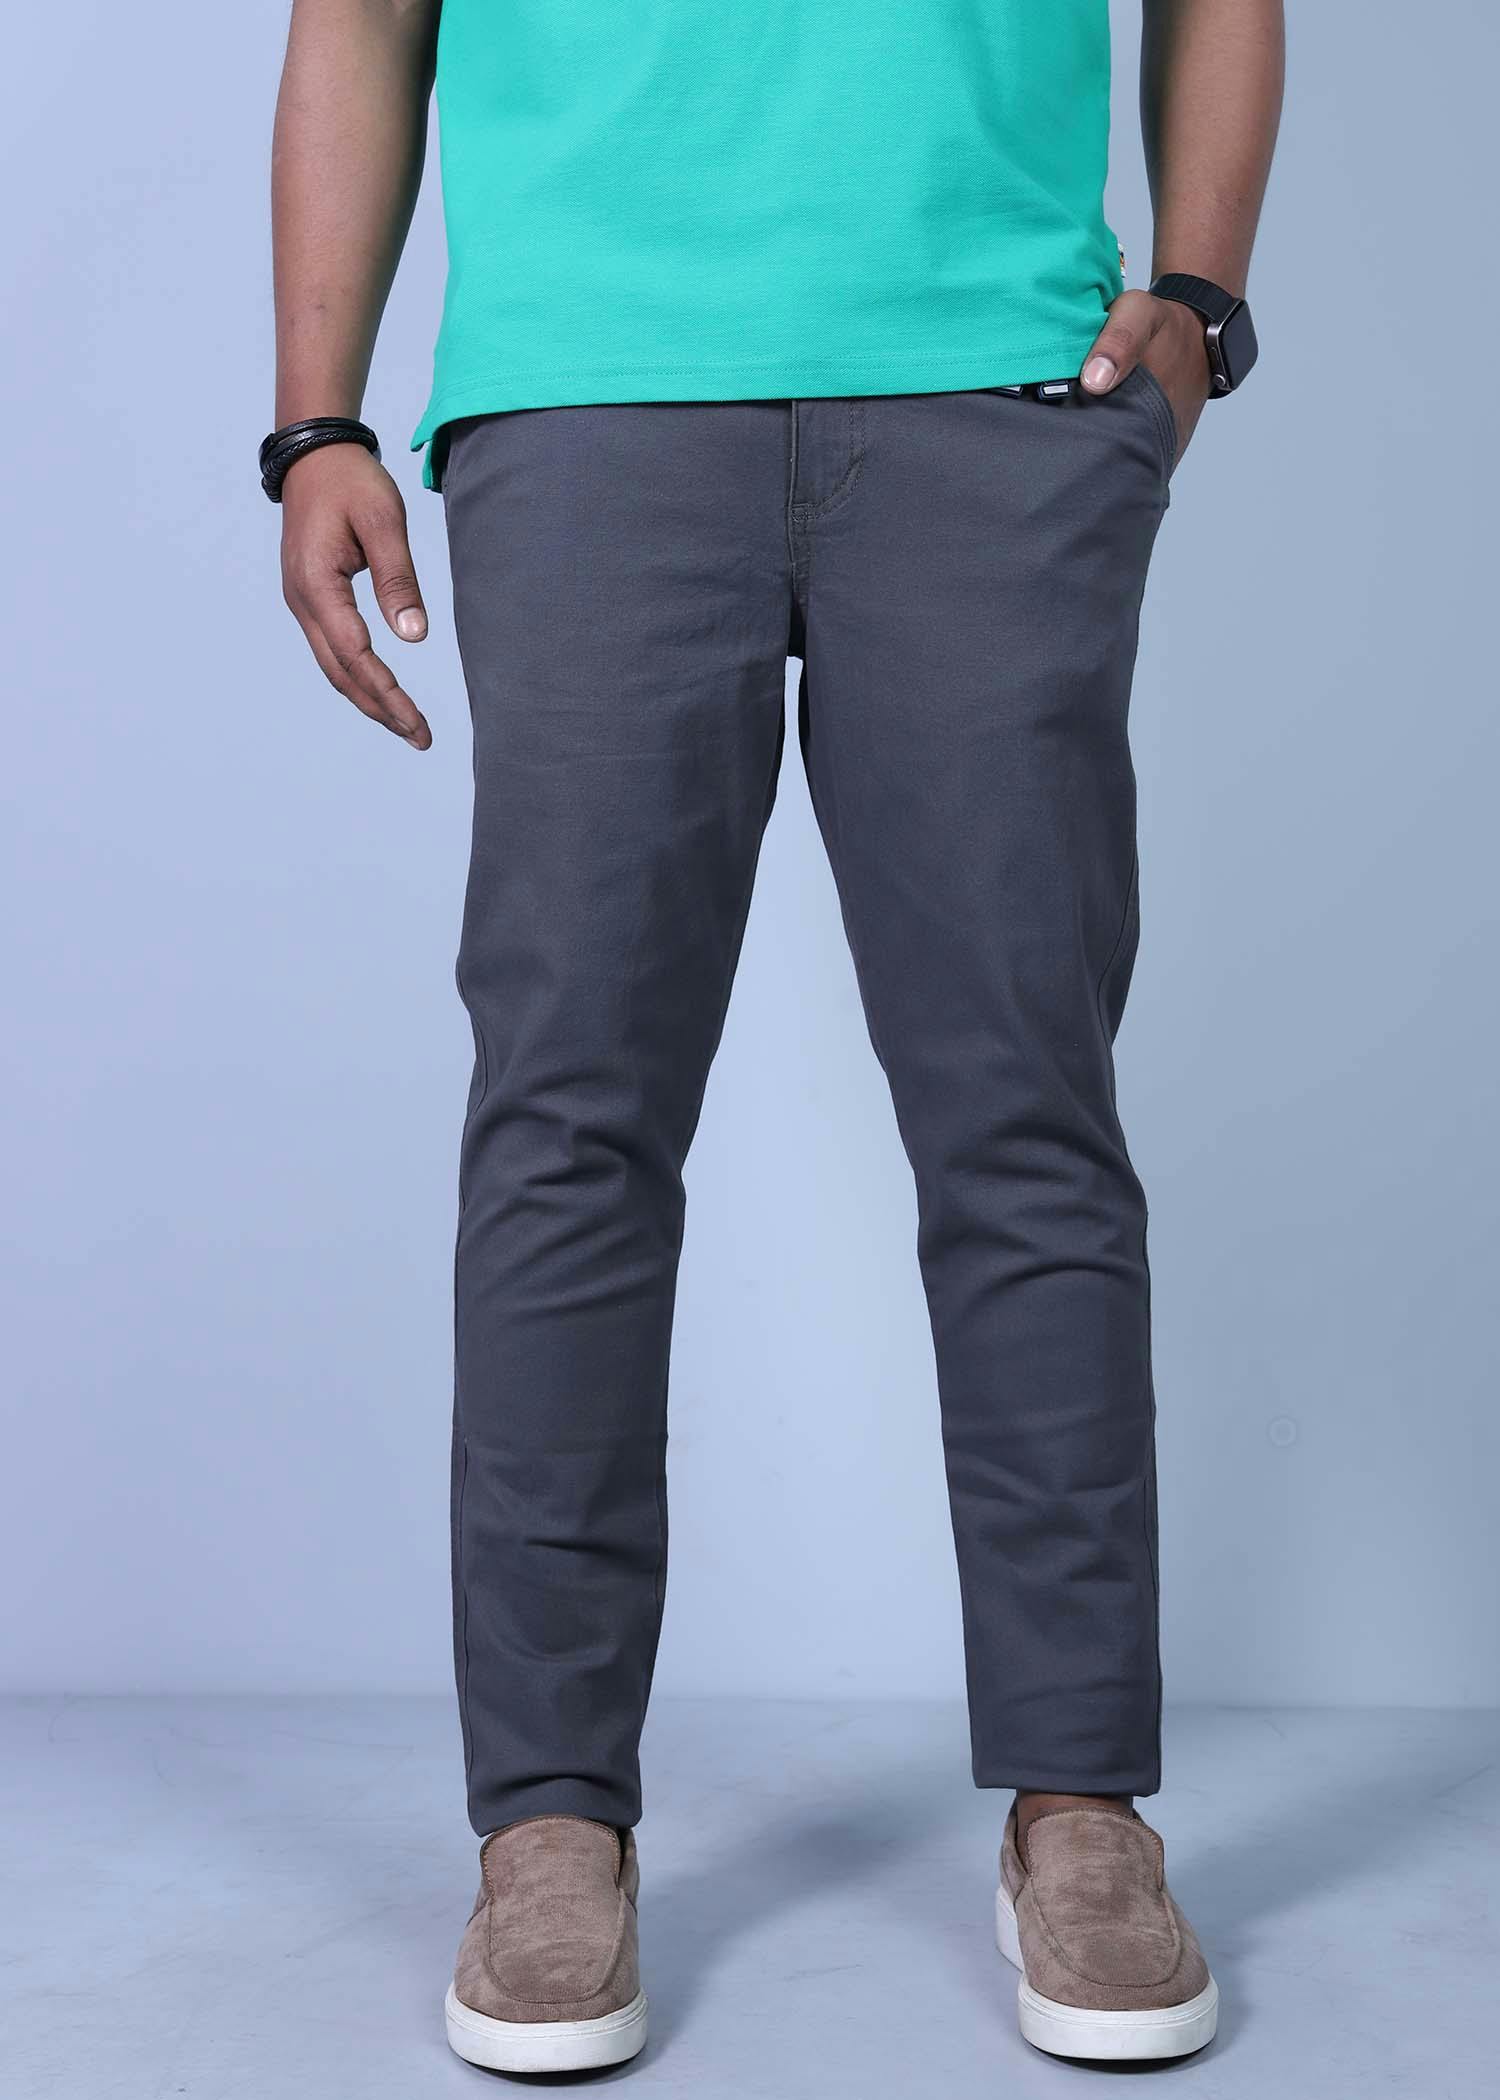 parla i chino pant stone color half front view